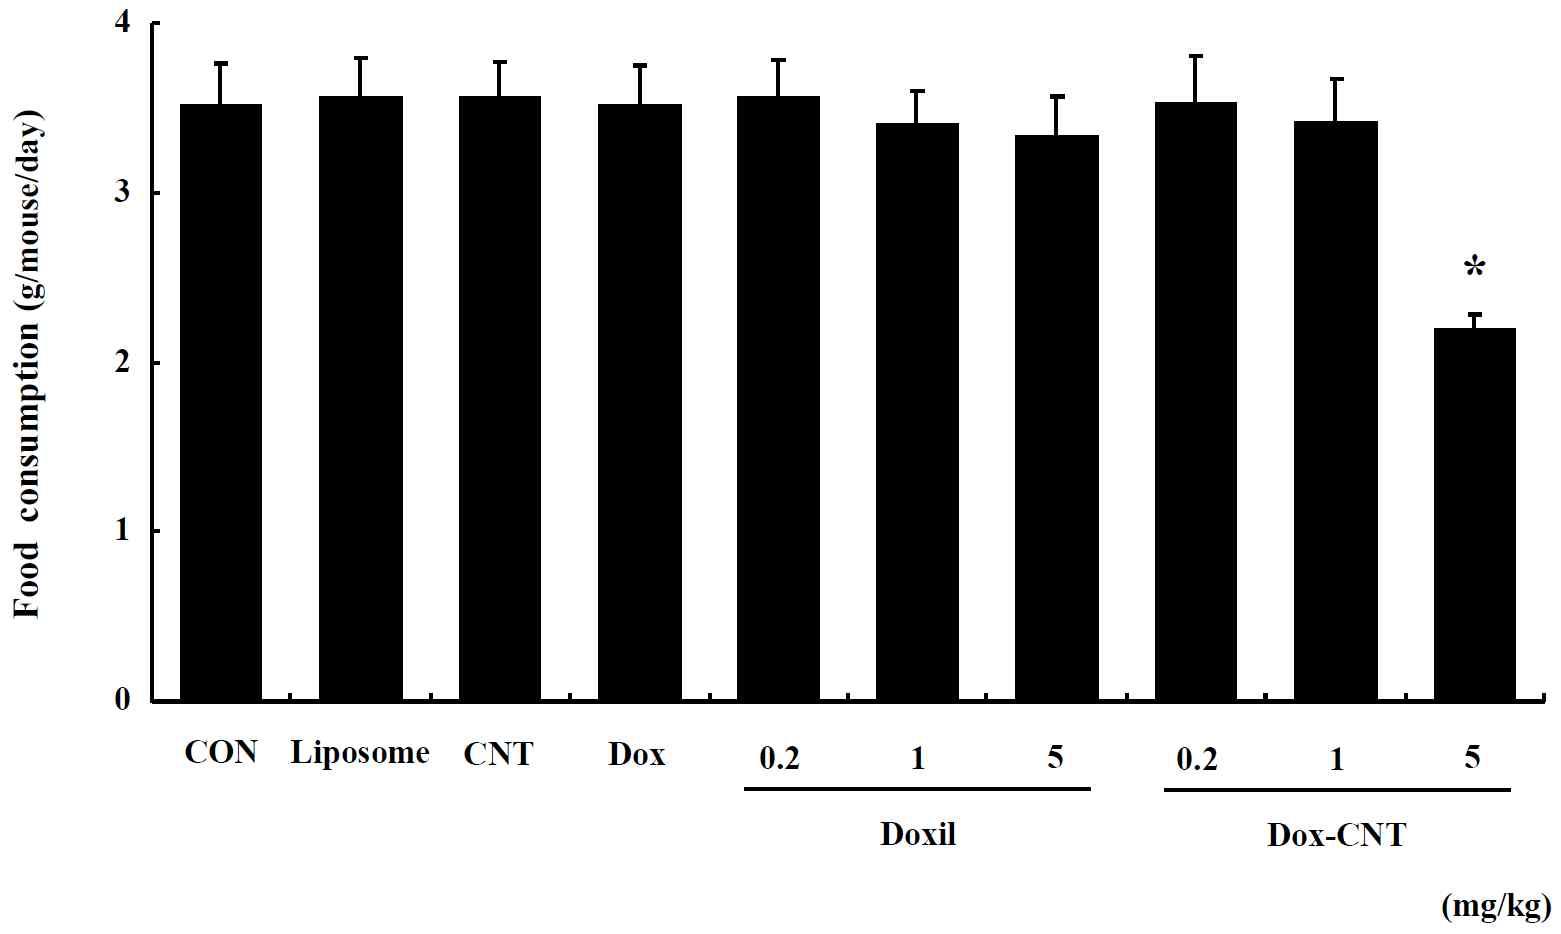 The change of food consumption in female ICR mice for 14 days after single exposure. Mice were respectively administered by intravenous injection with liposome, CNT, Dox, Doxil (0.2, 1, 5 mg/kg) and Dox-CNT (0.2, 1, 5 mg/kg). The results are presented as mean ± SE (n = 10). * p < 0.05, significantly different from the control.